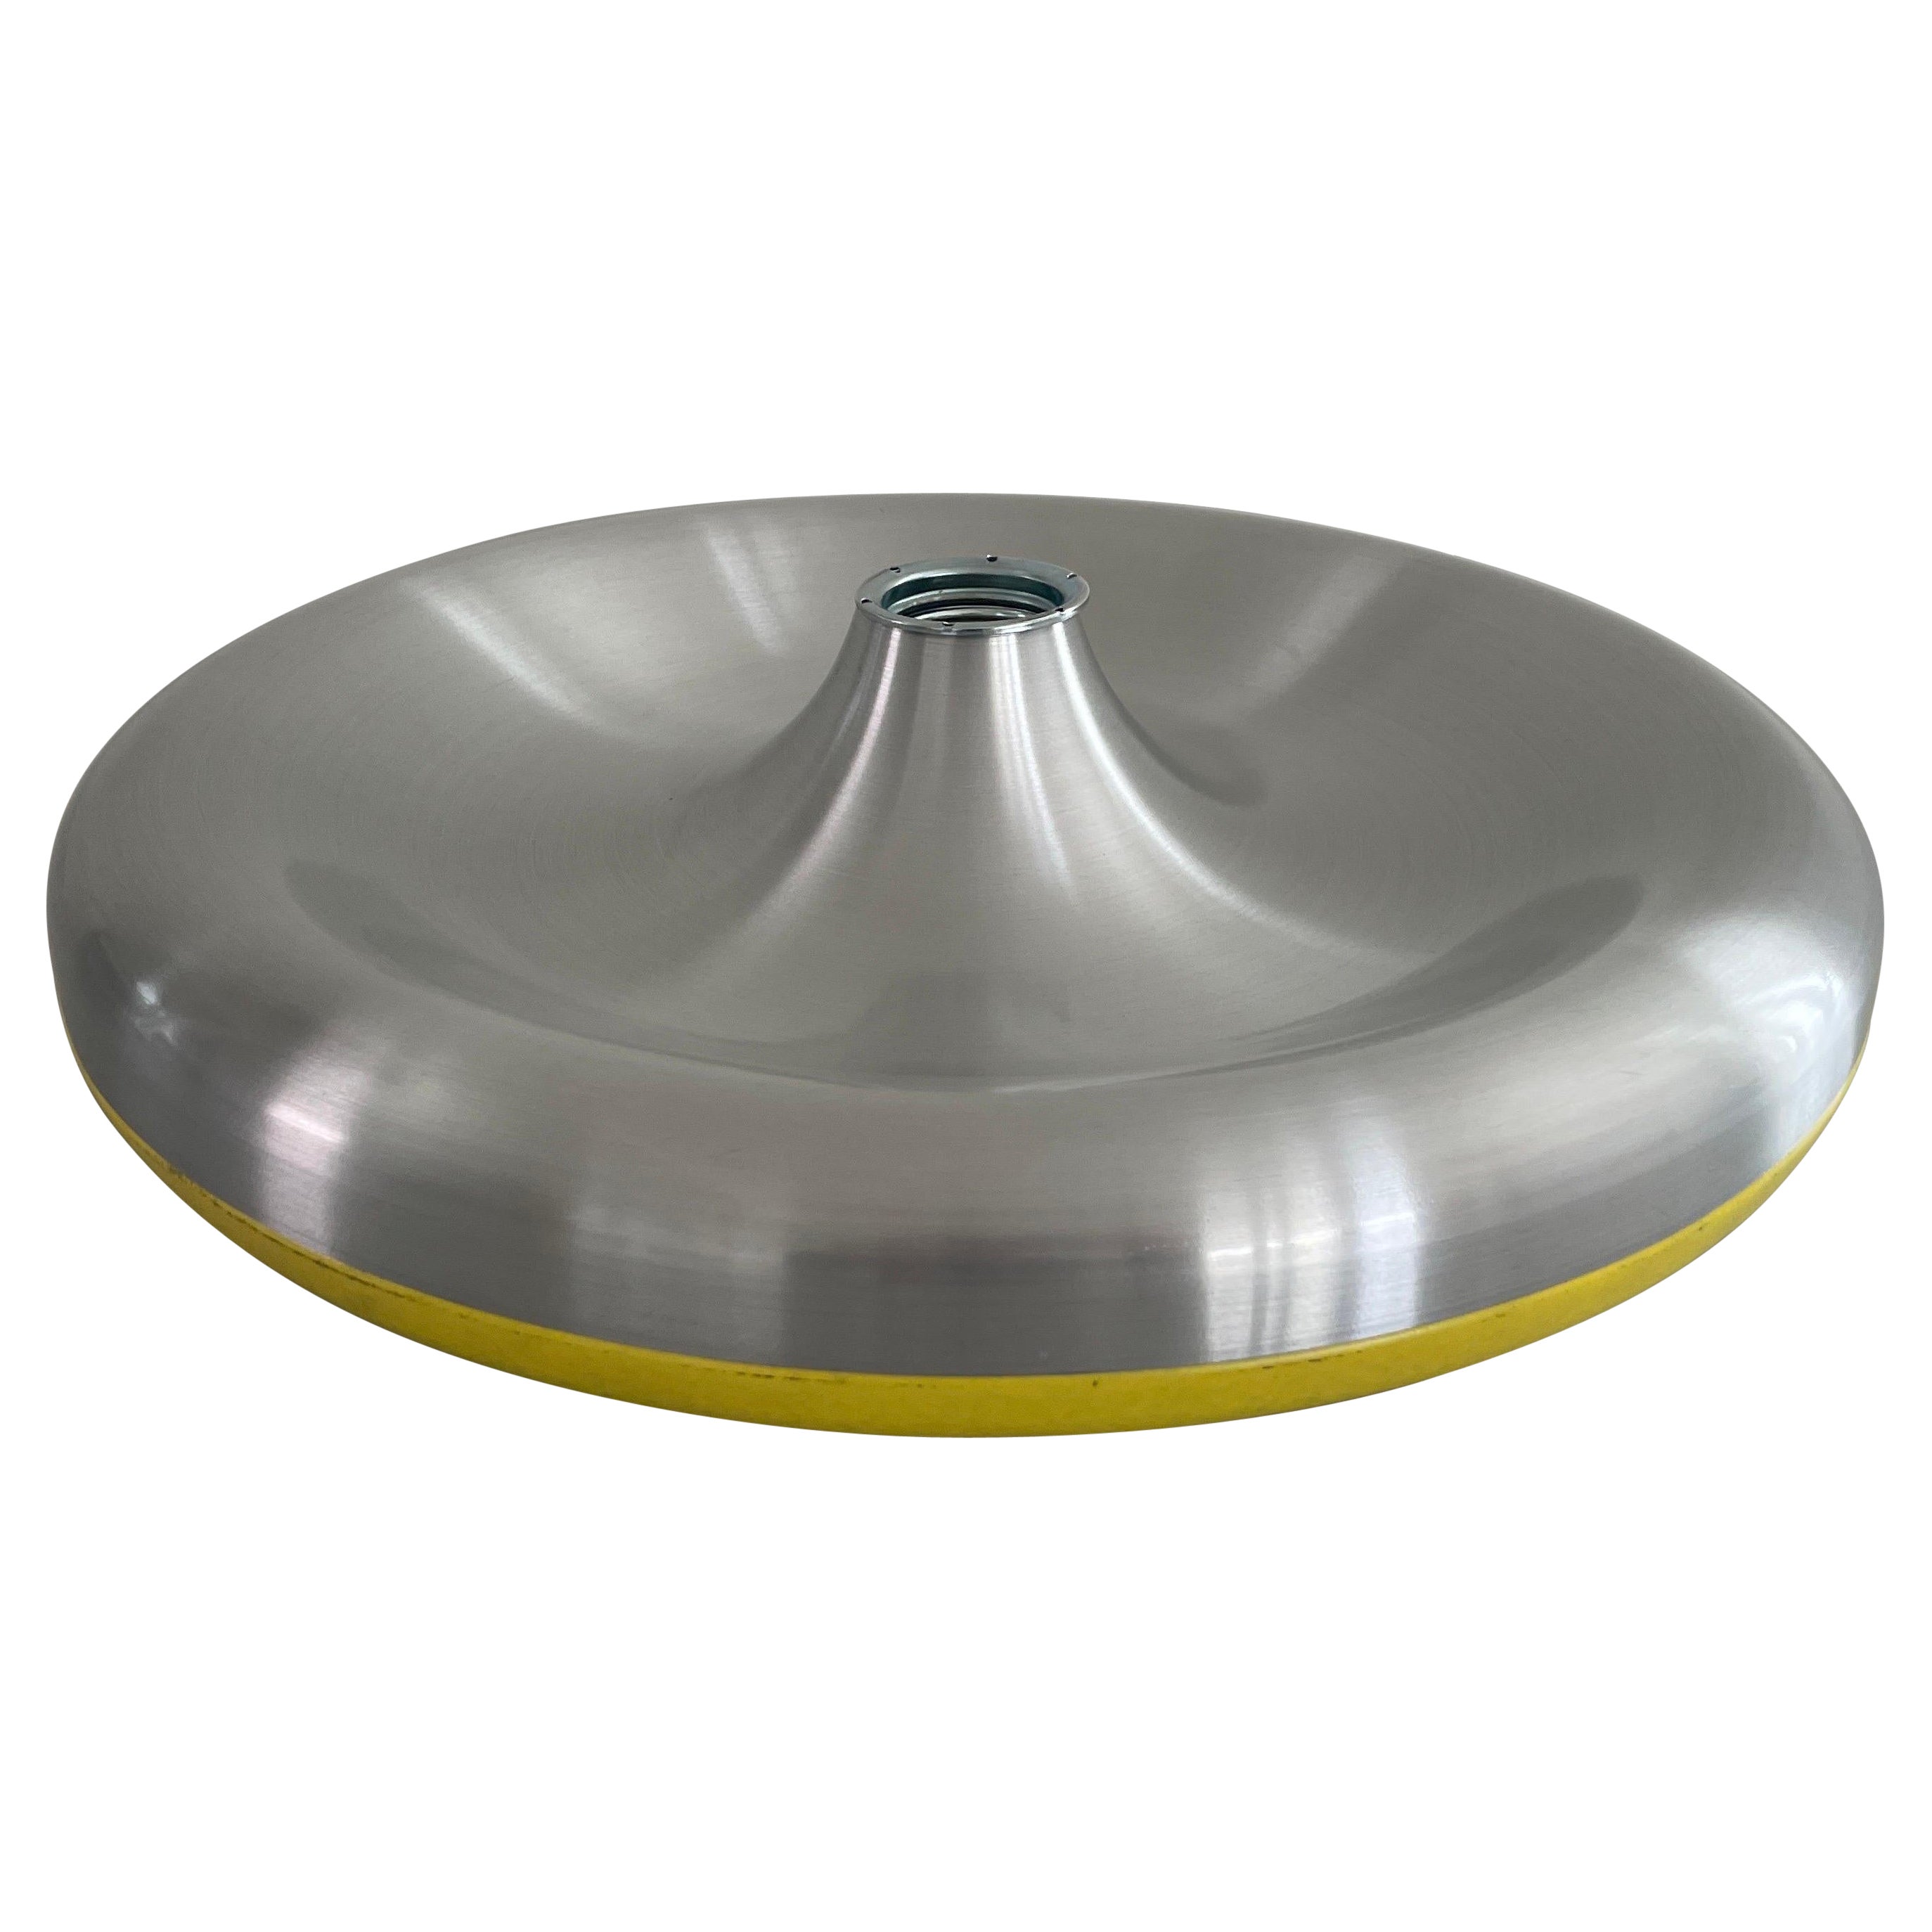 Metallic Grey and Yellow Space Age Flush Mount Ceiling Lamp, 1970s, Germany For Sale